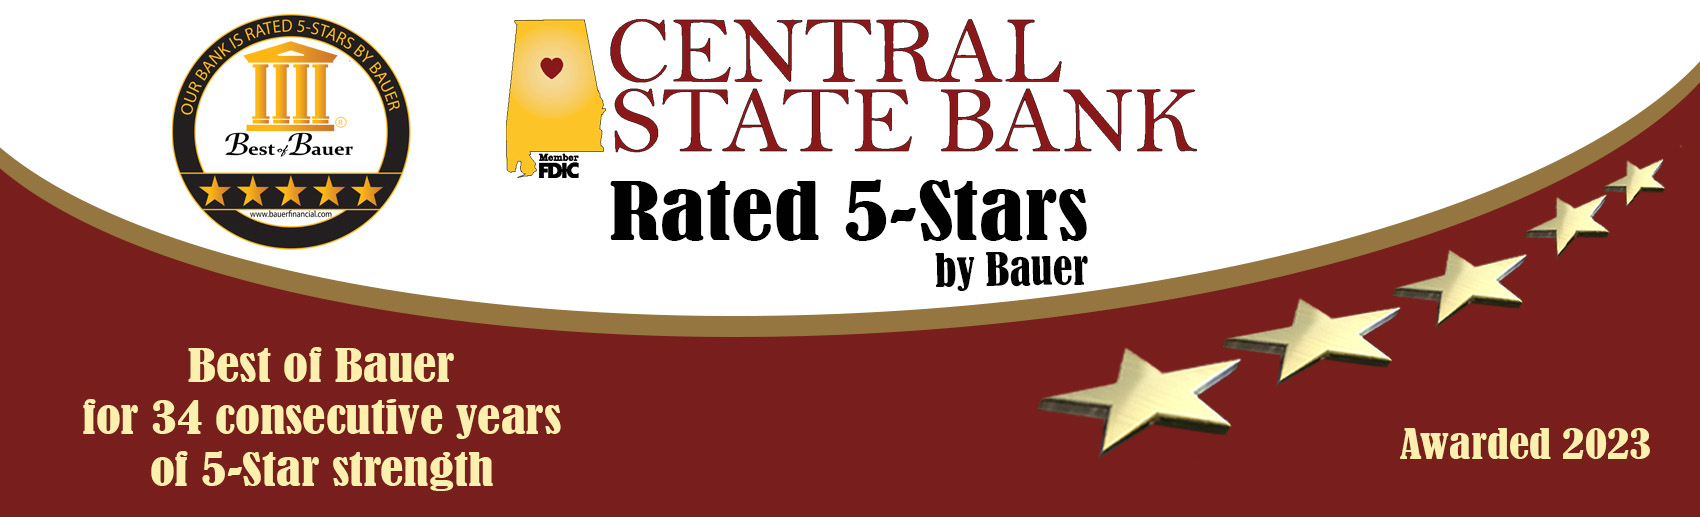 Central State Bank Rated 5 Stars by Bauer Financial for 34 conseutive years